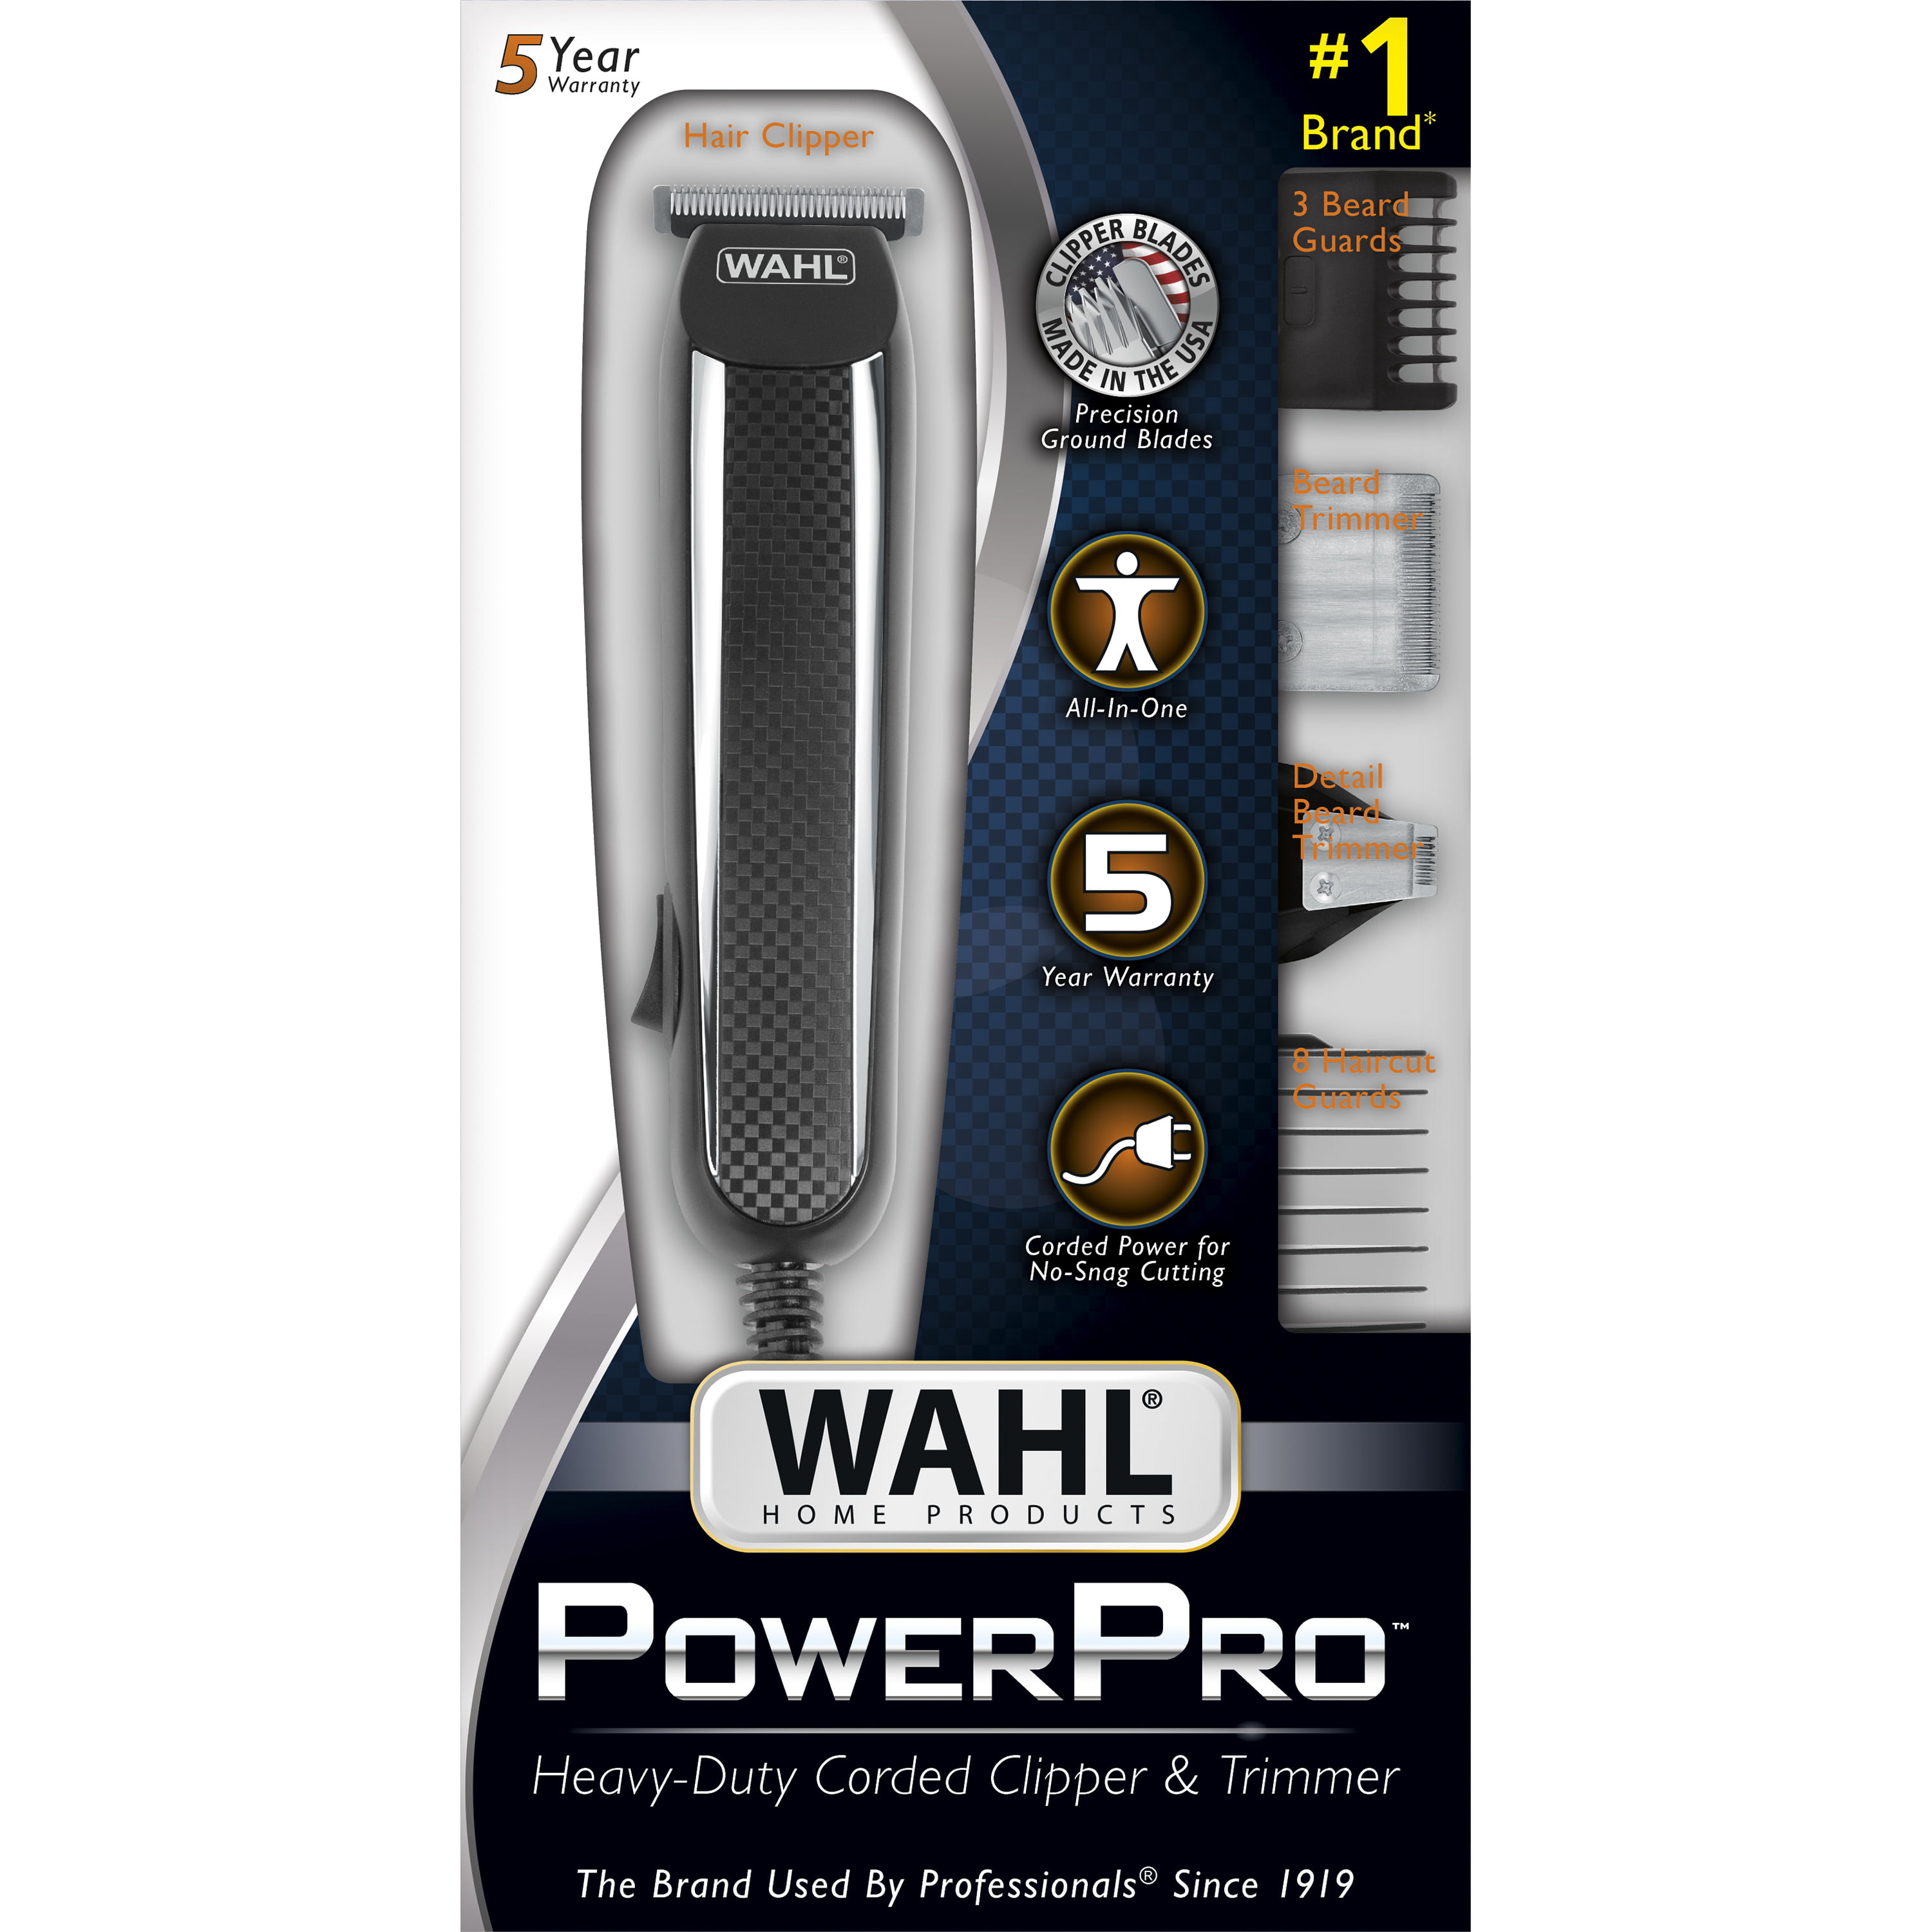 wahl power